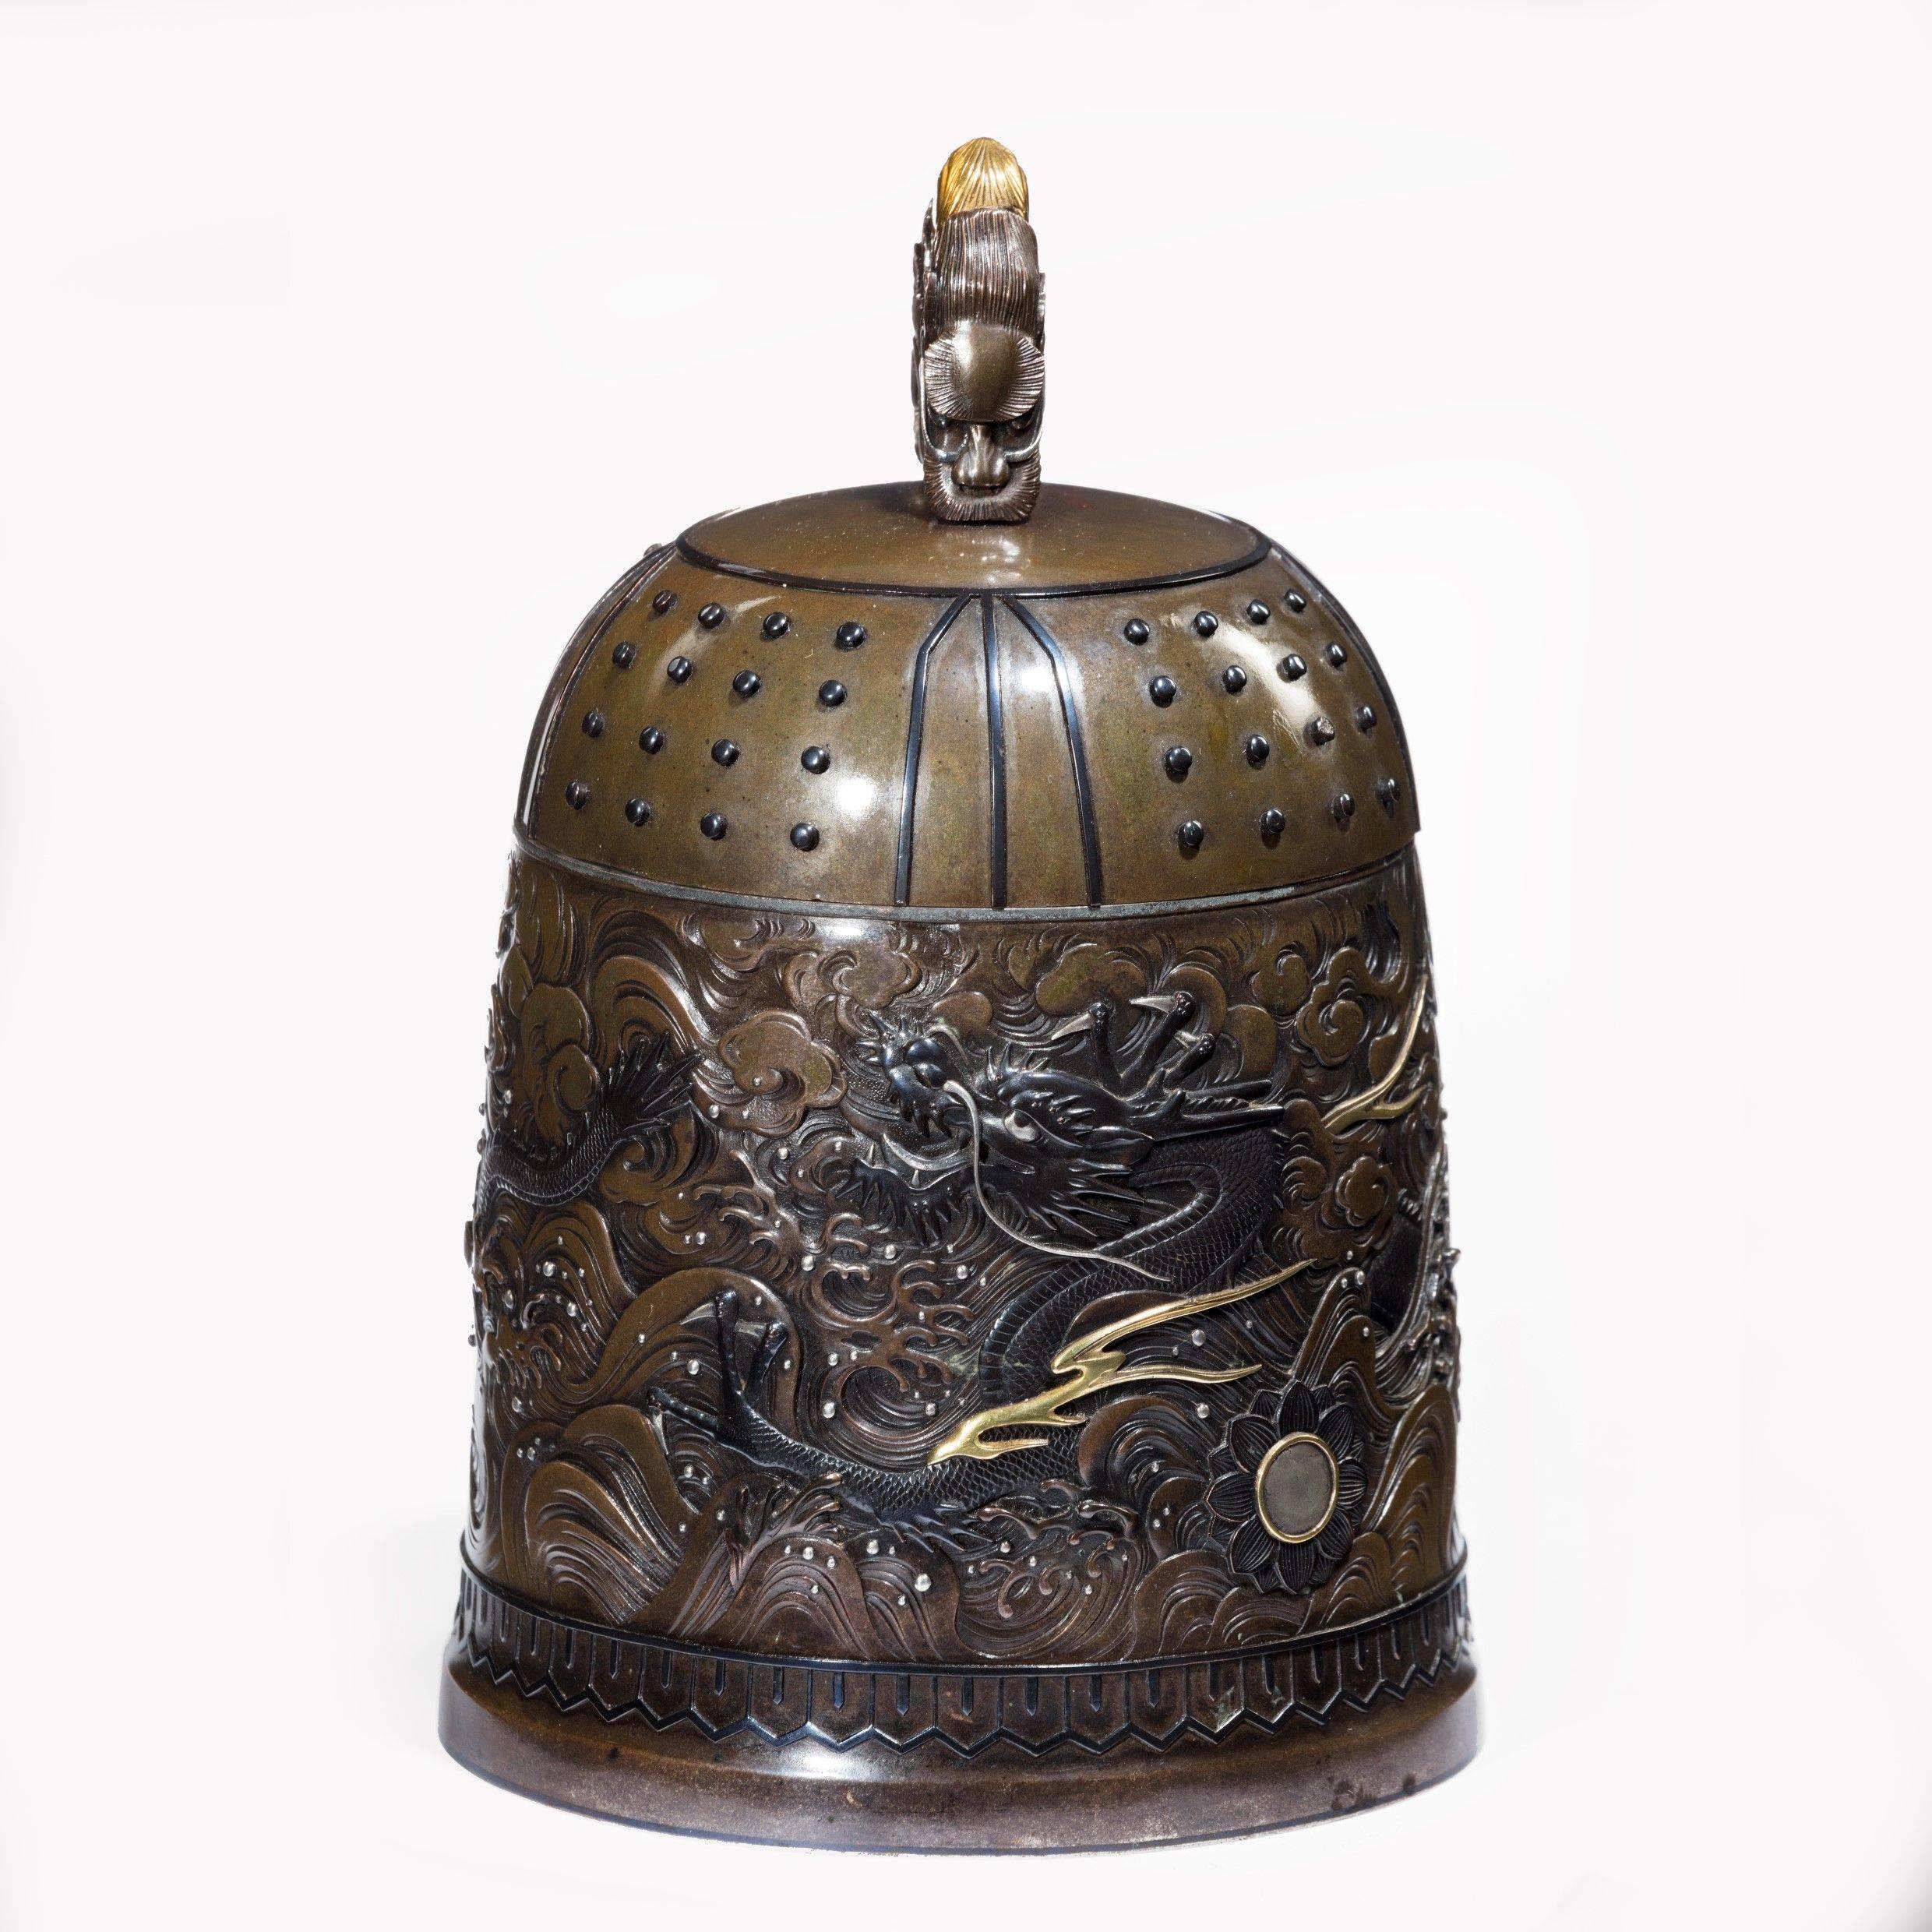 Meiji Period Bell Casket by the Nogowa Foundary In Good Condition For Sale In Lymington, Hampshire